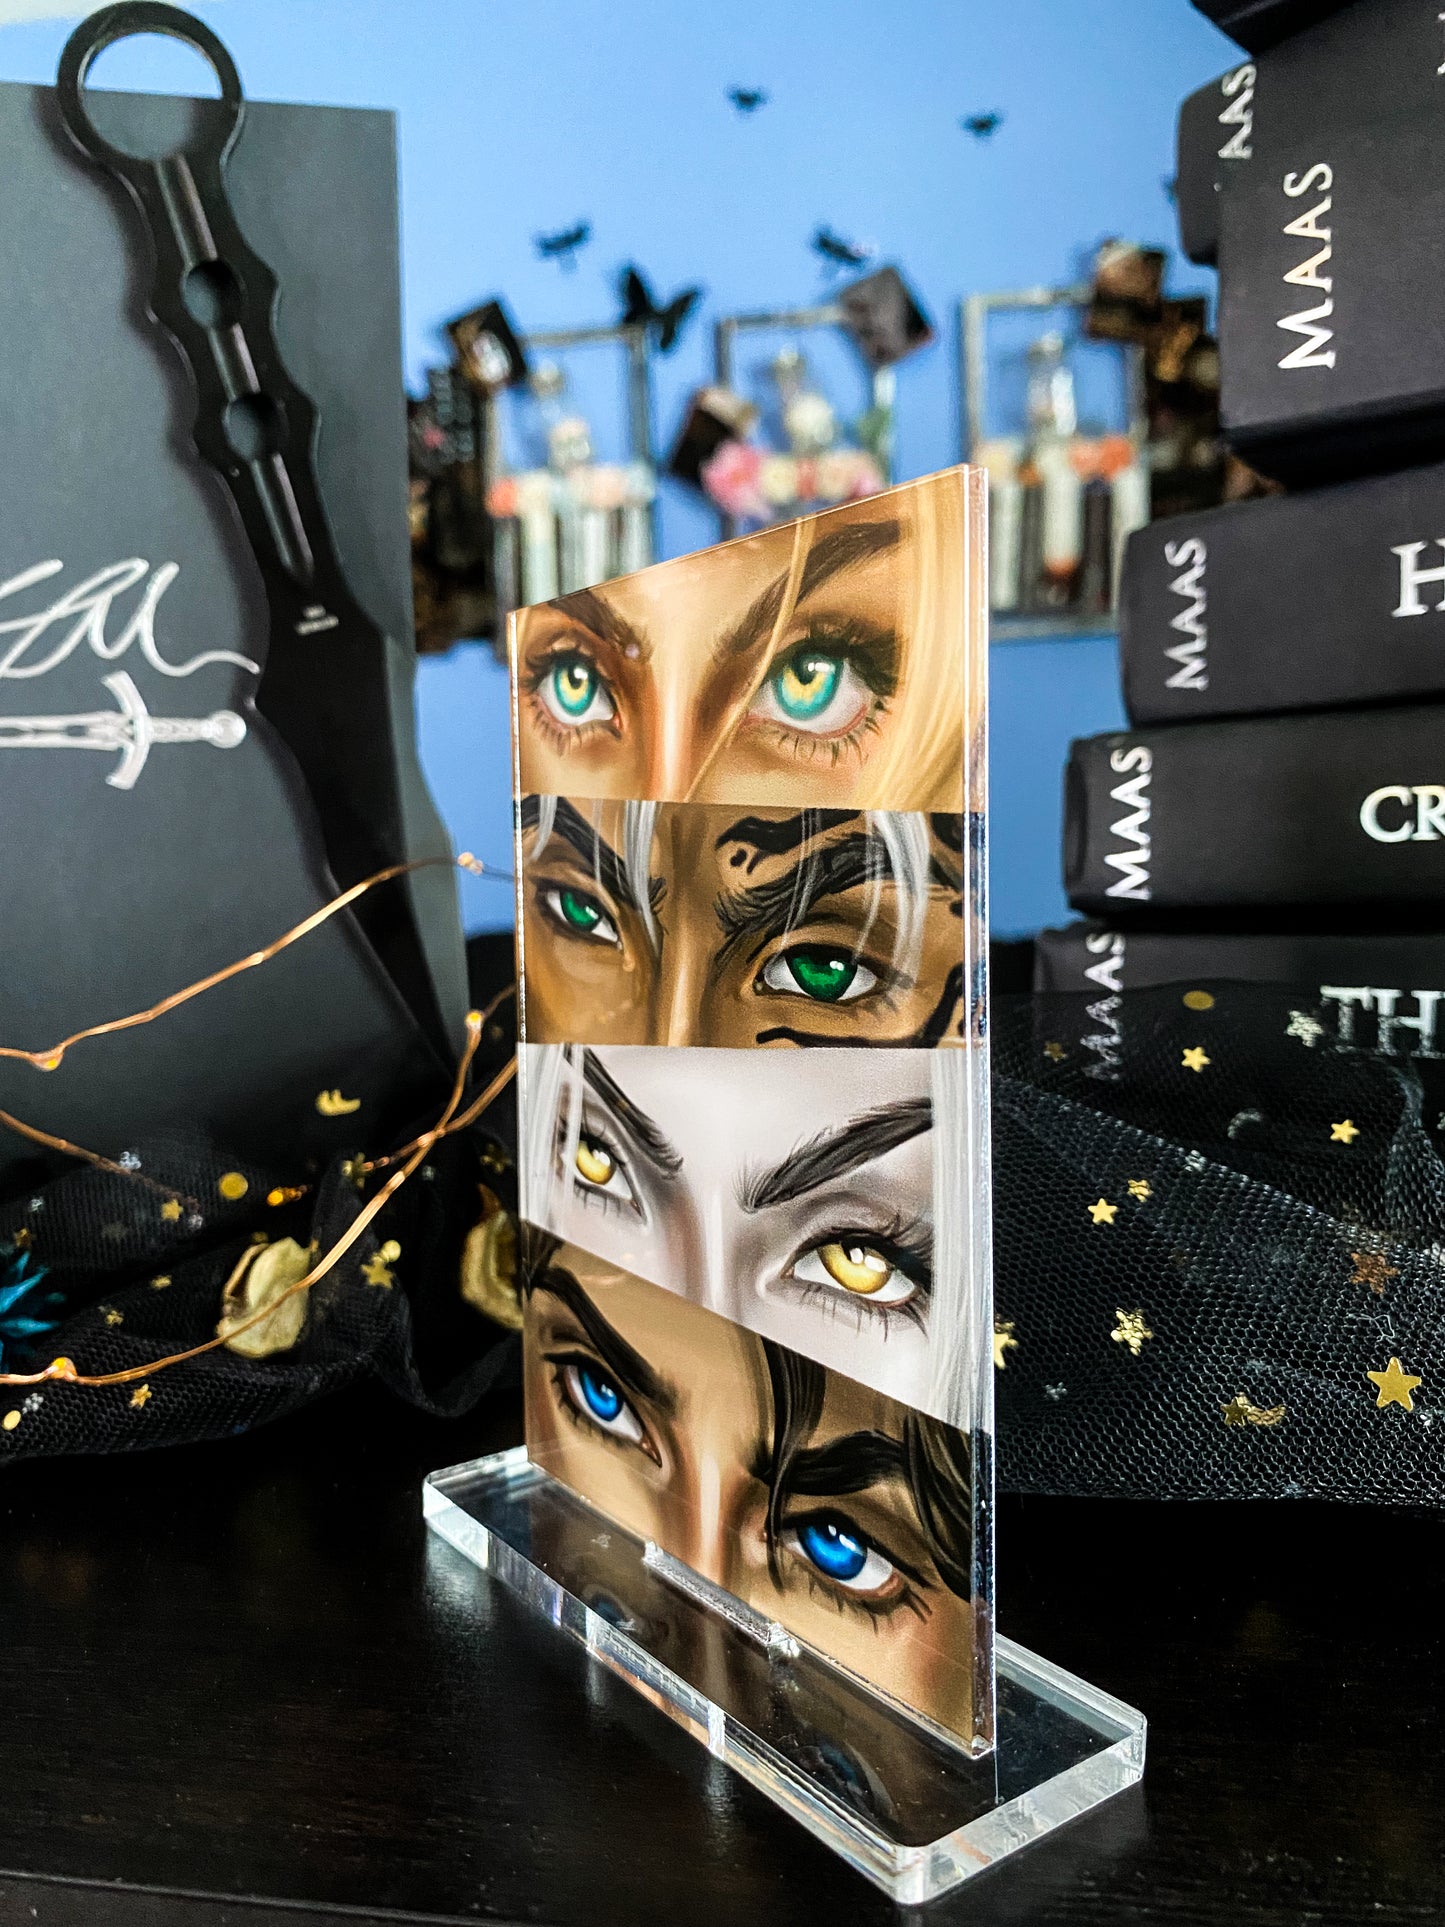 Eyes of TOG - Fan Art from @InkFaeArt - Freestanding Bookshelf / Desktop Acrylic Accessory - Officially licensed by Sarah J. Maas - FA18